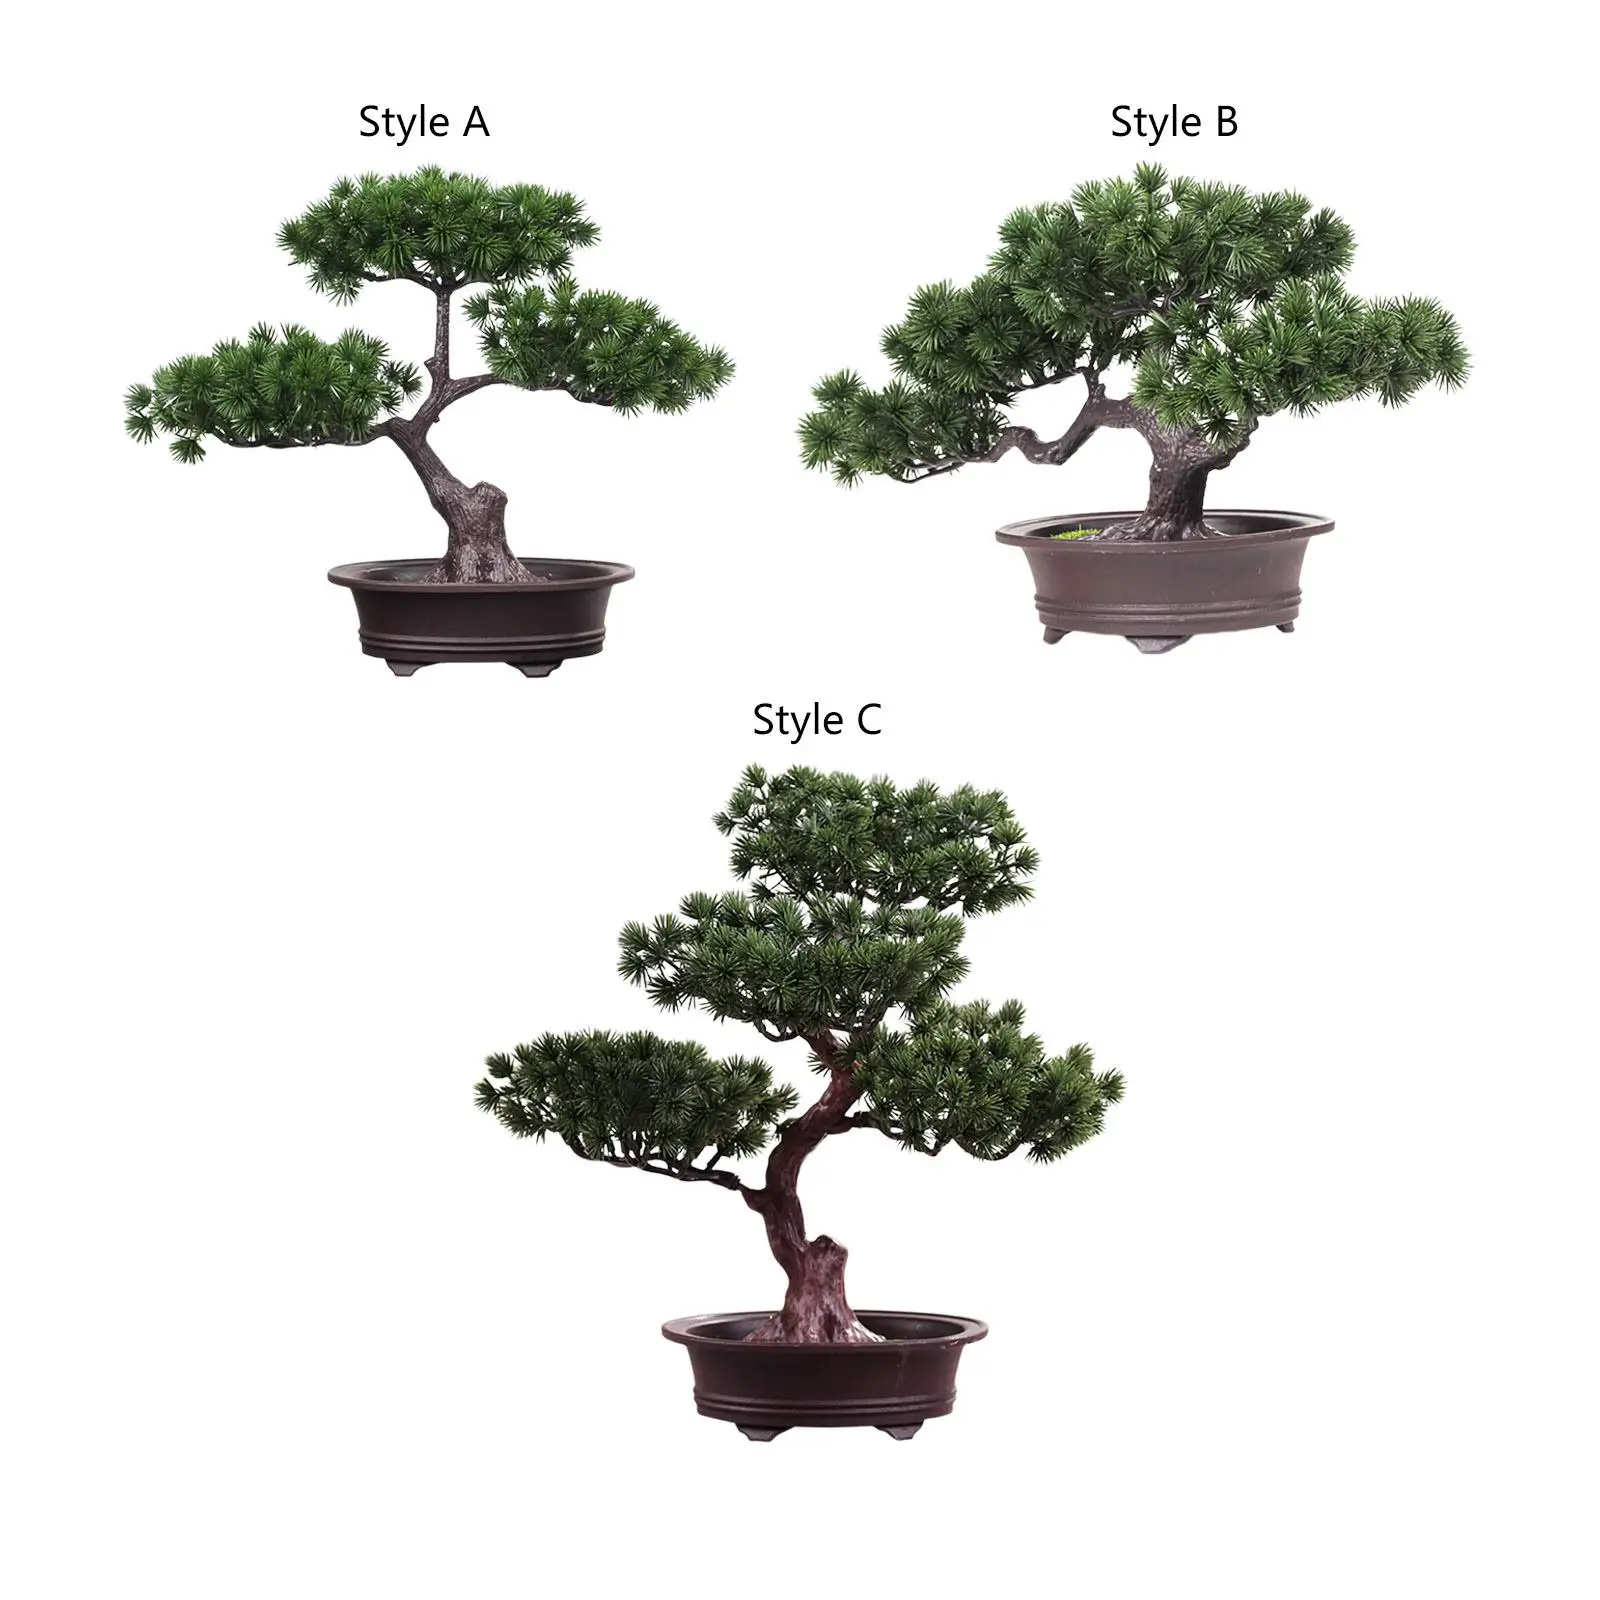 Simulation Tree Potted Plant Artificial Green Plant Realistic Durable Desk Display Multifunctional for Terrace Windowsill